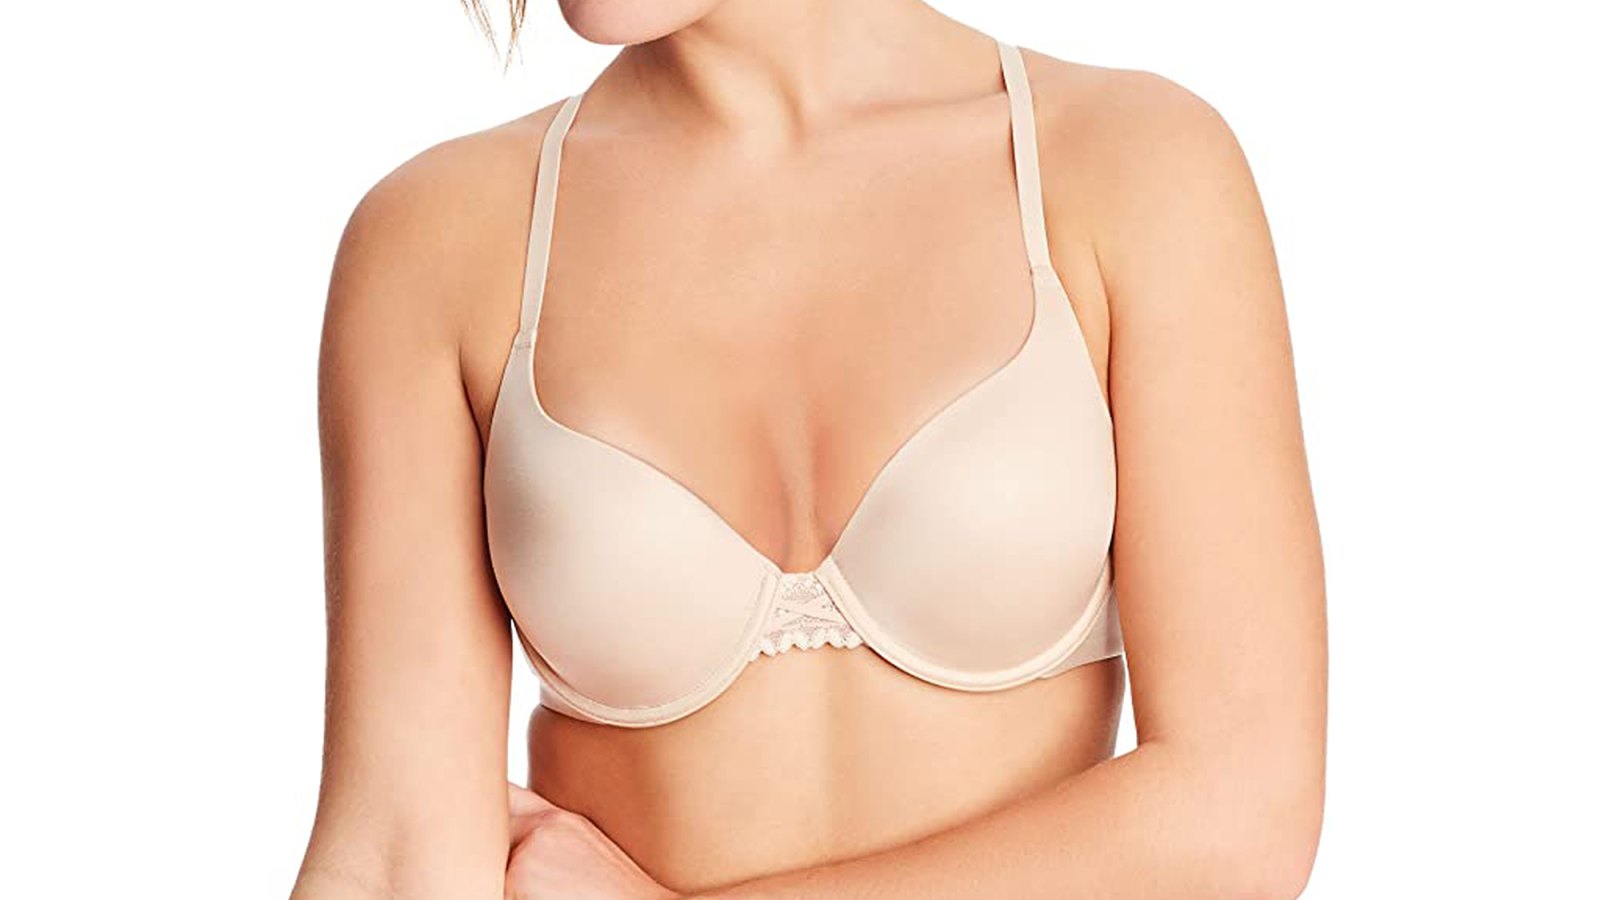 Her own words, Non Wire Push Up bra- Night Shimmer